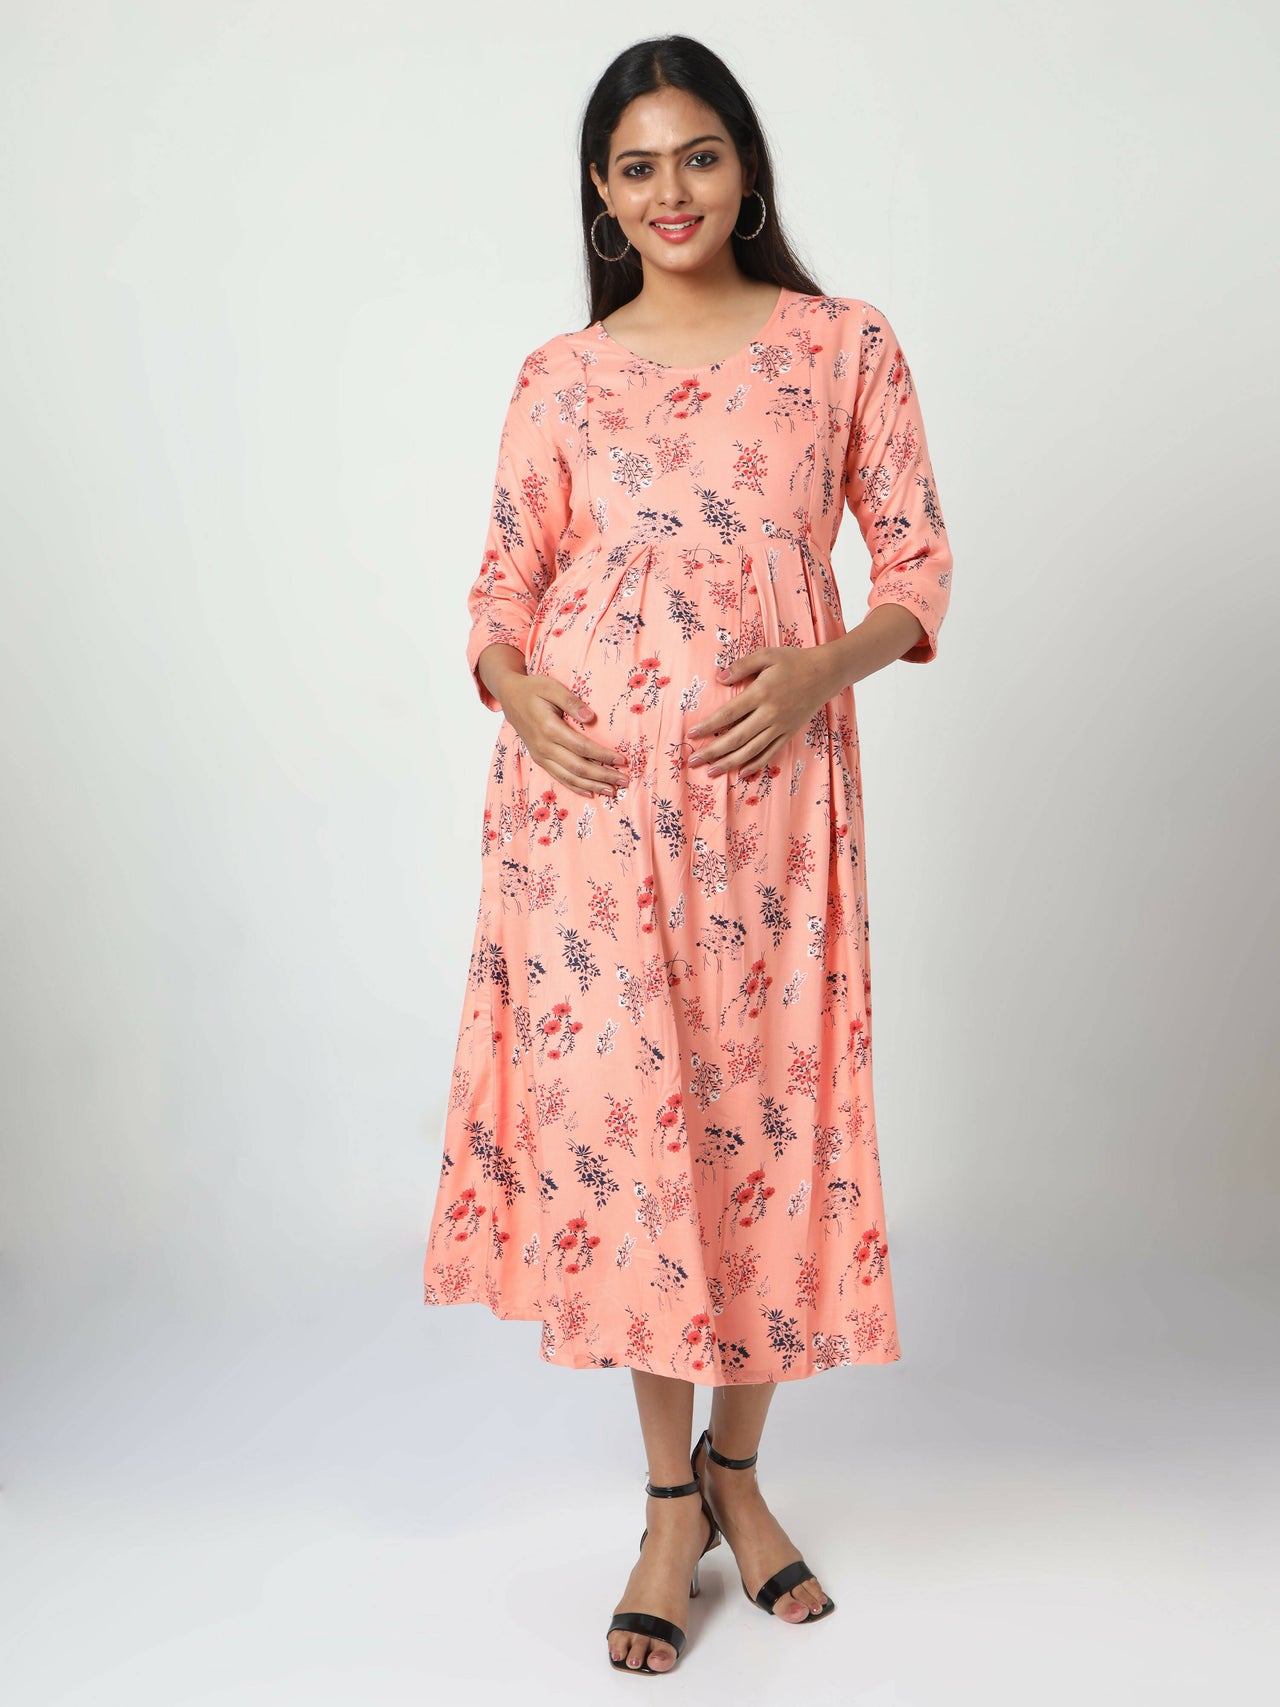 Manet Three Fourth Maternity Dress Floral Print With Concealed Zipper Nursing Access - Orange - Distacart